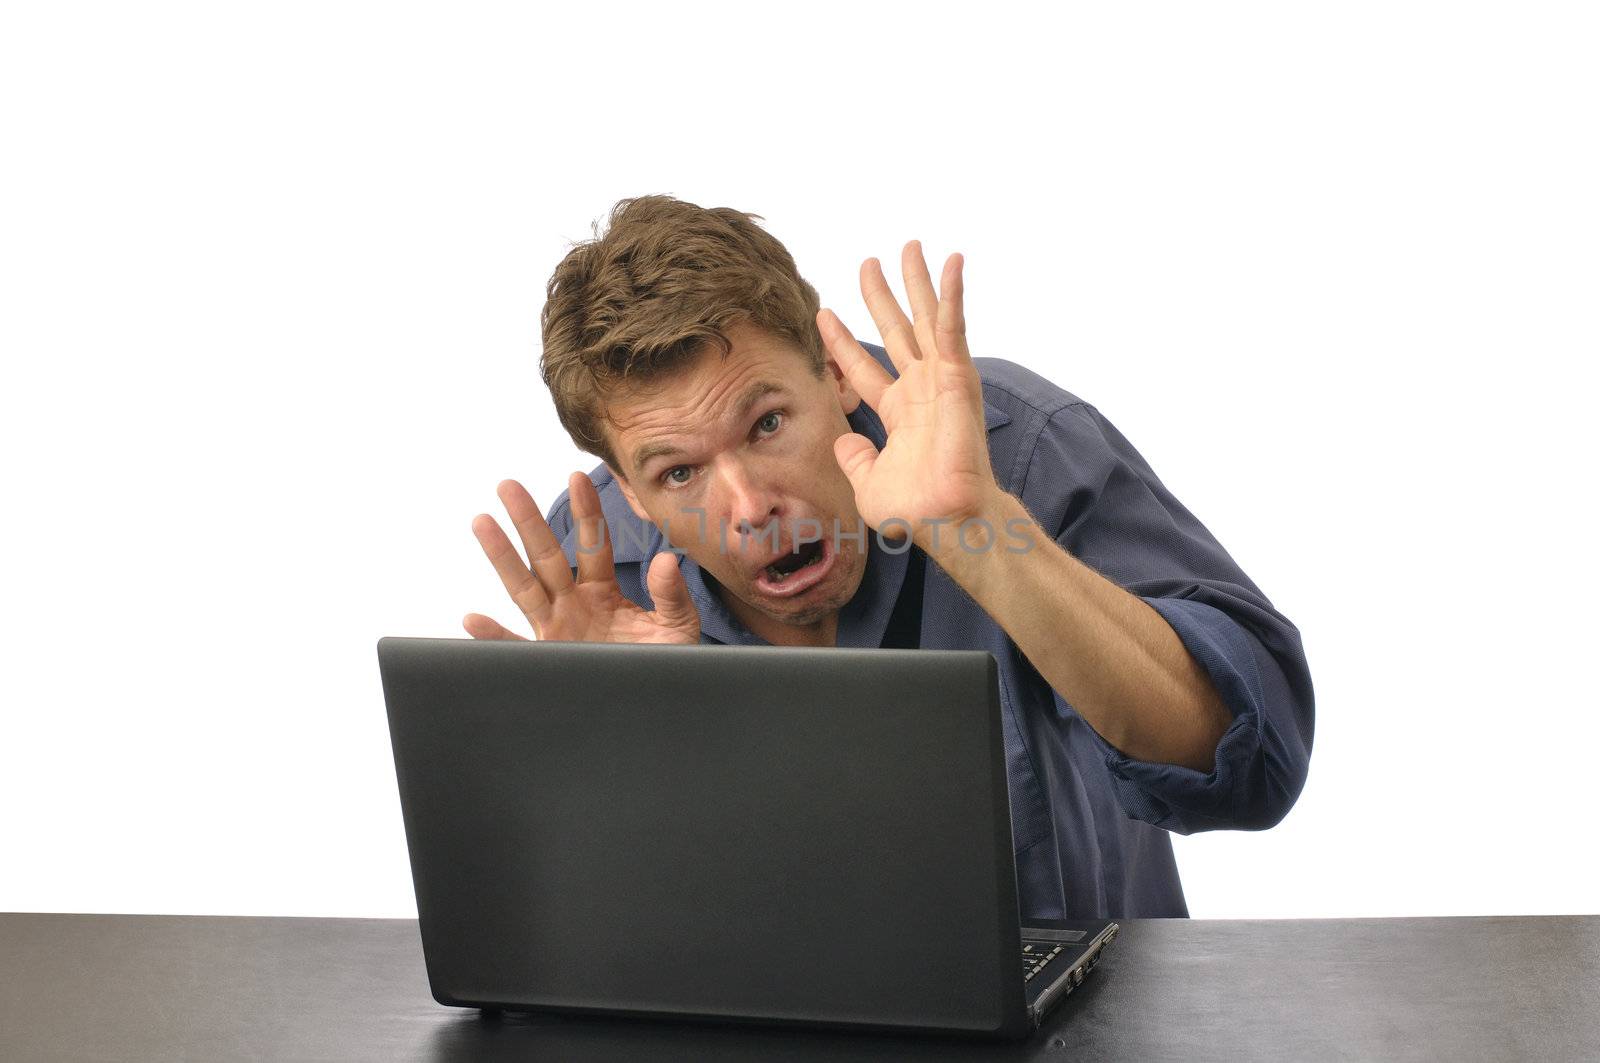 Fearful man with hands up crouches down behind computer